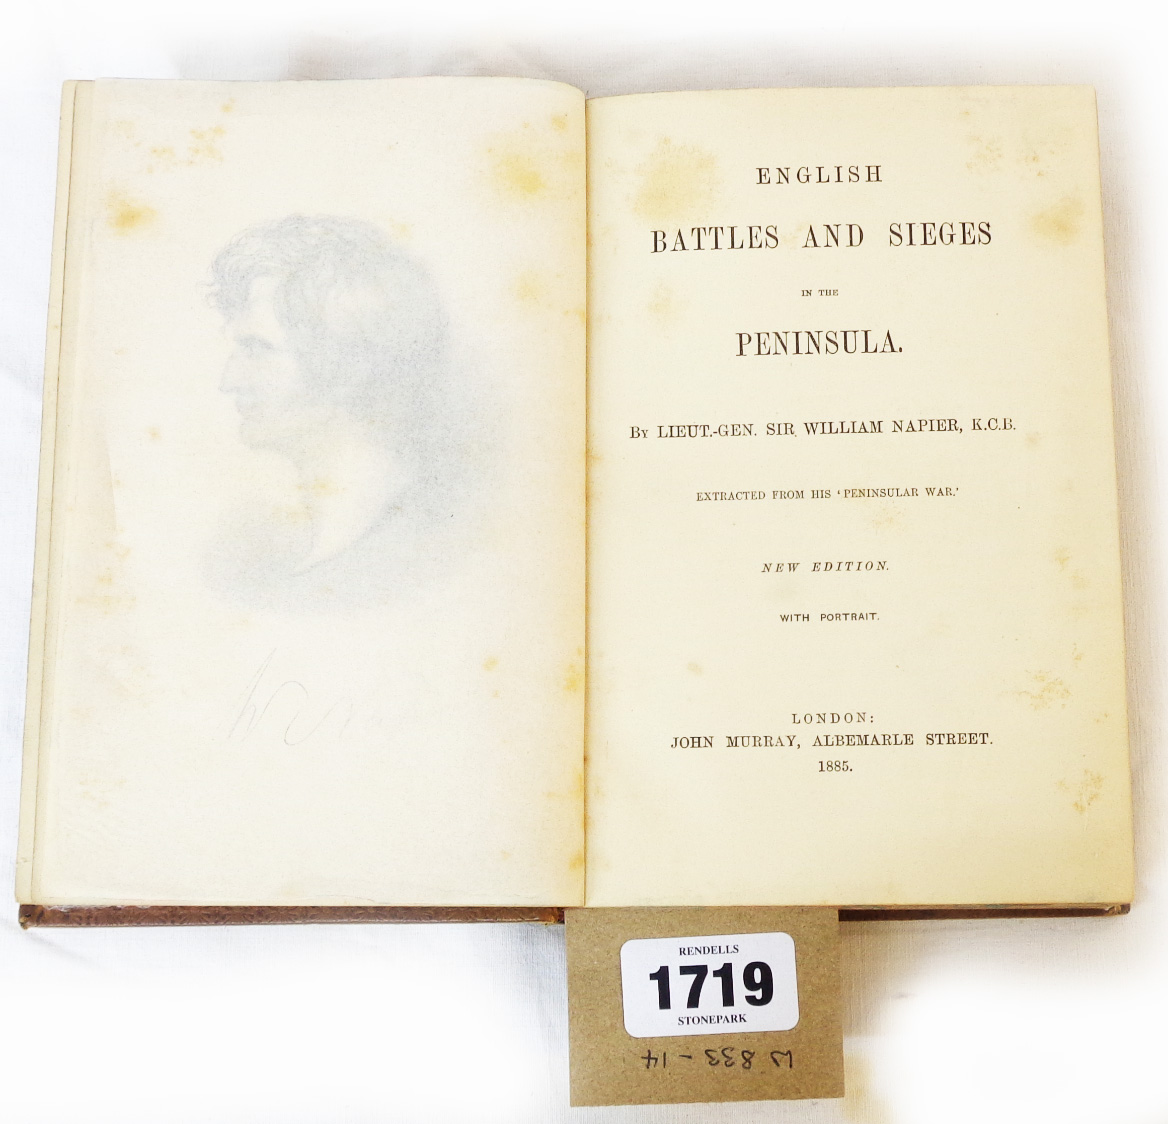 English Battles and Sieges in the Peninsula: by Lt.-Gen. William Napier, KCB, 8vo, ex-libris,